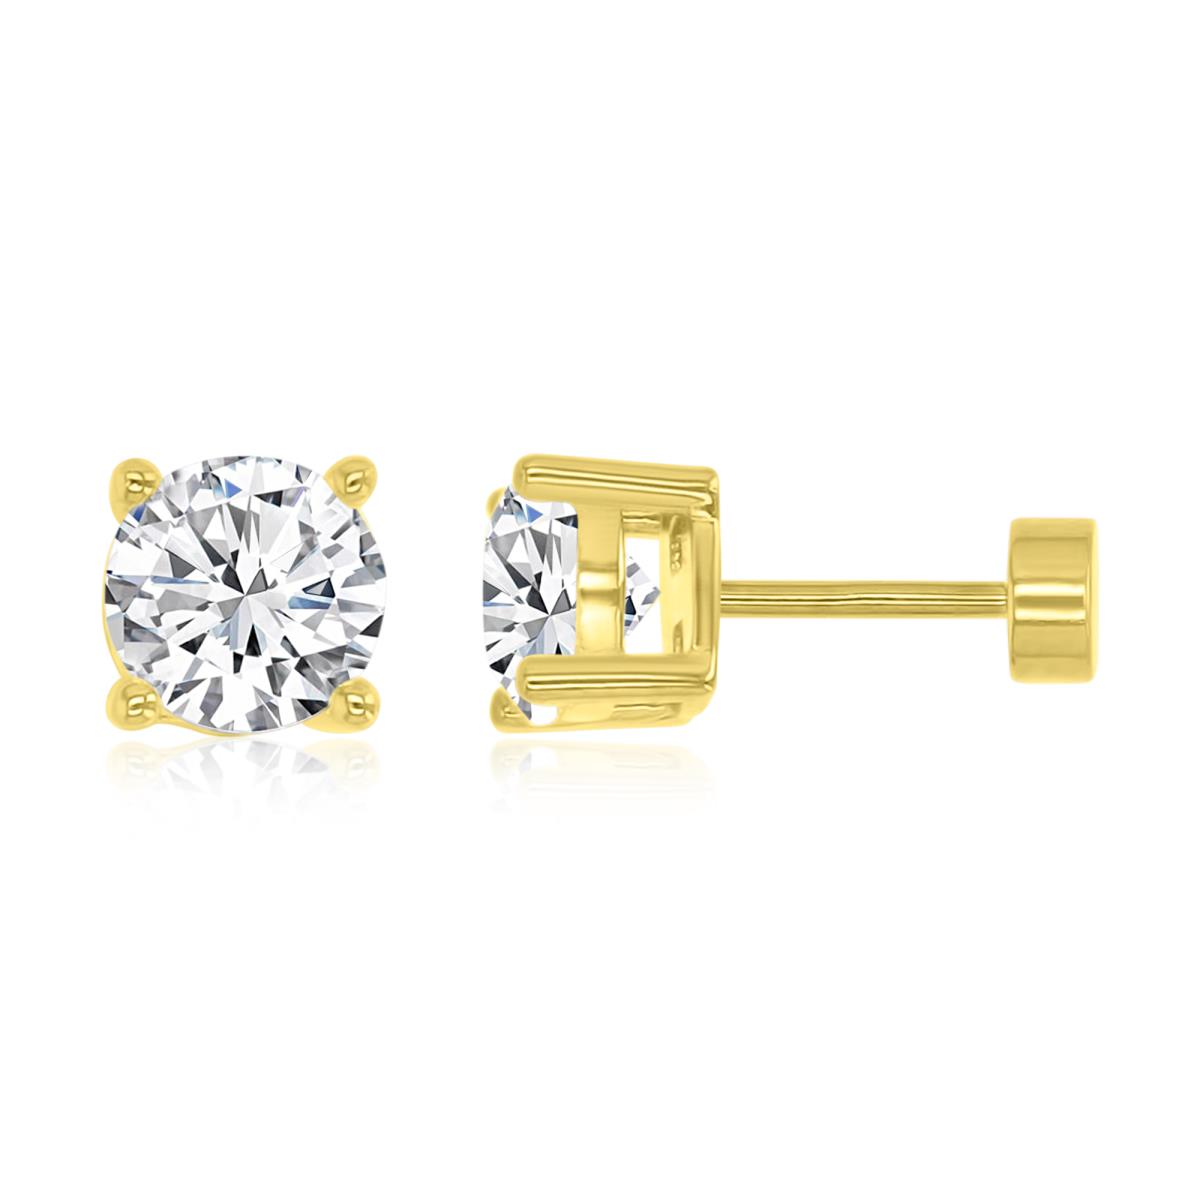 Sterling Silver Yellow 5.00mm AAA Round Solitaire Flat Back Stud Earrings